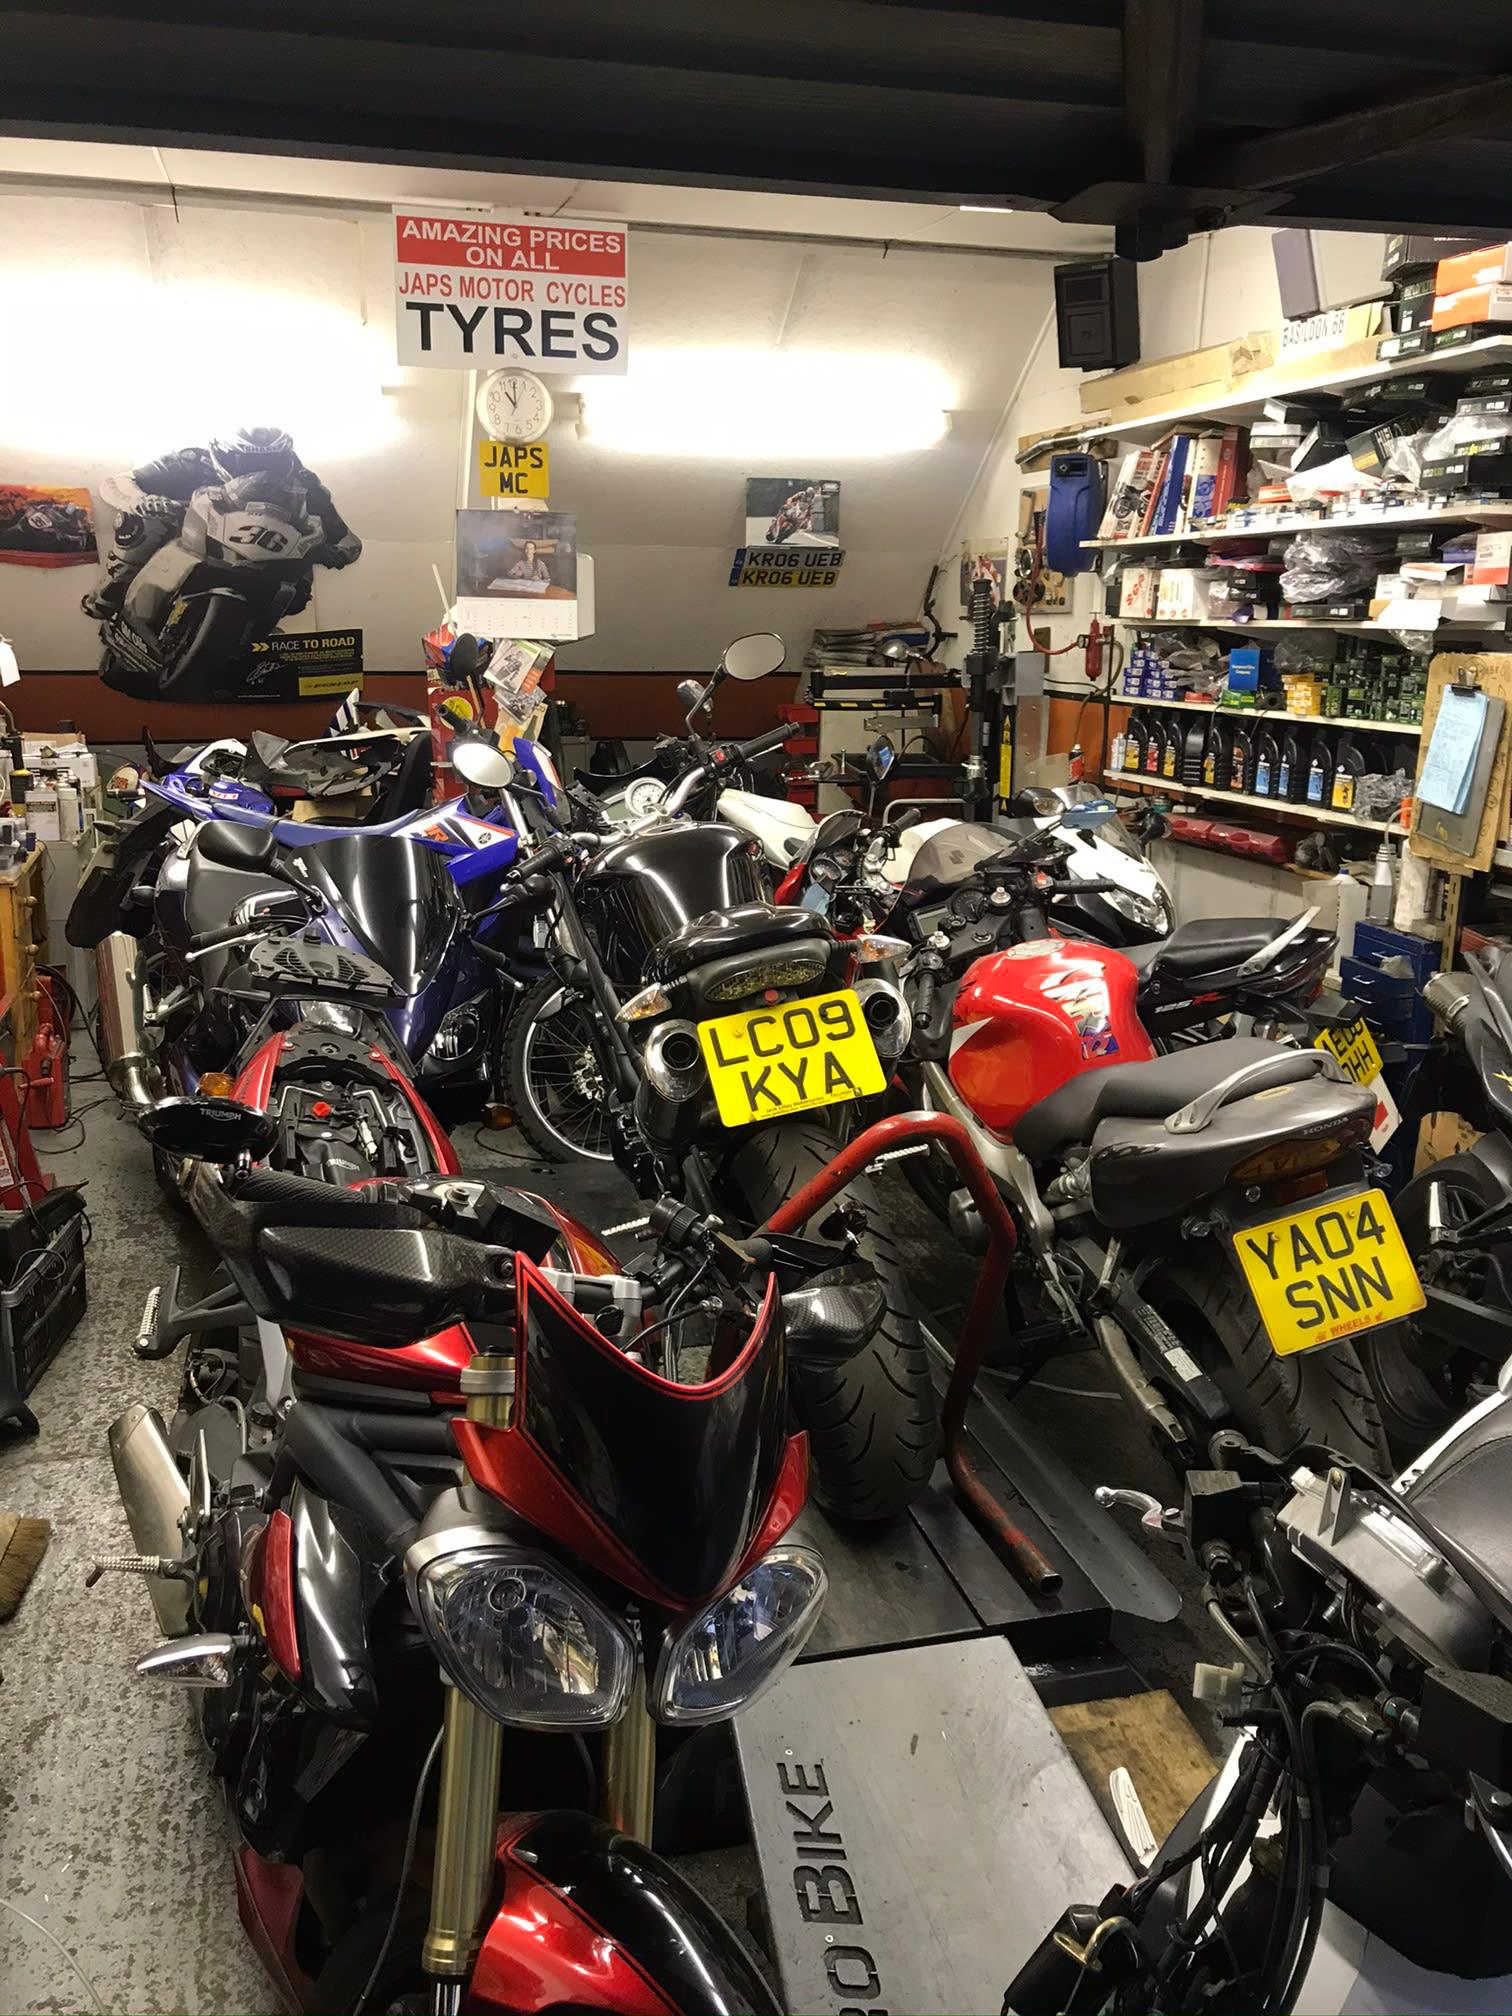 J A P S Motorcycles Upminster 01708 641787